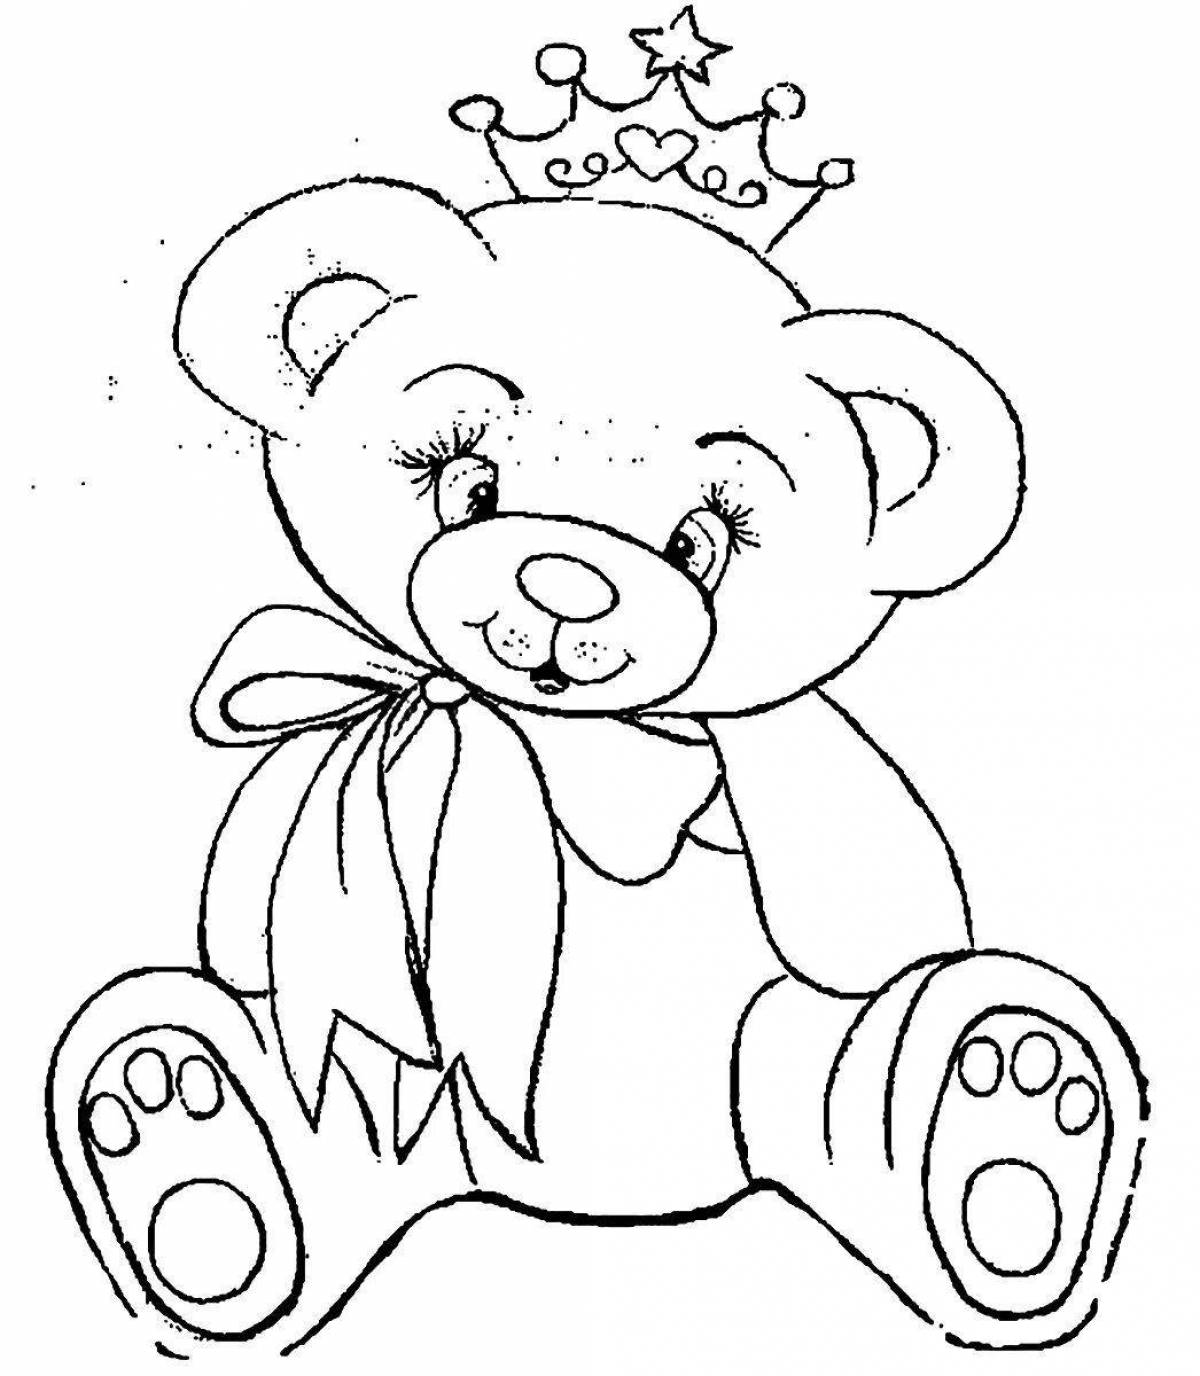 Live teddy bear with a bow coloring